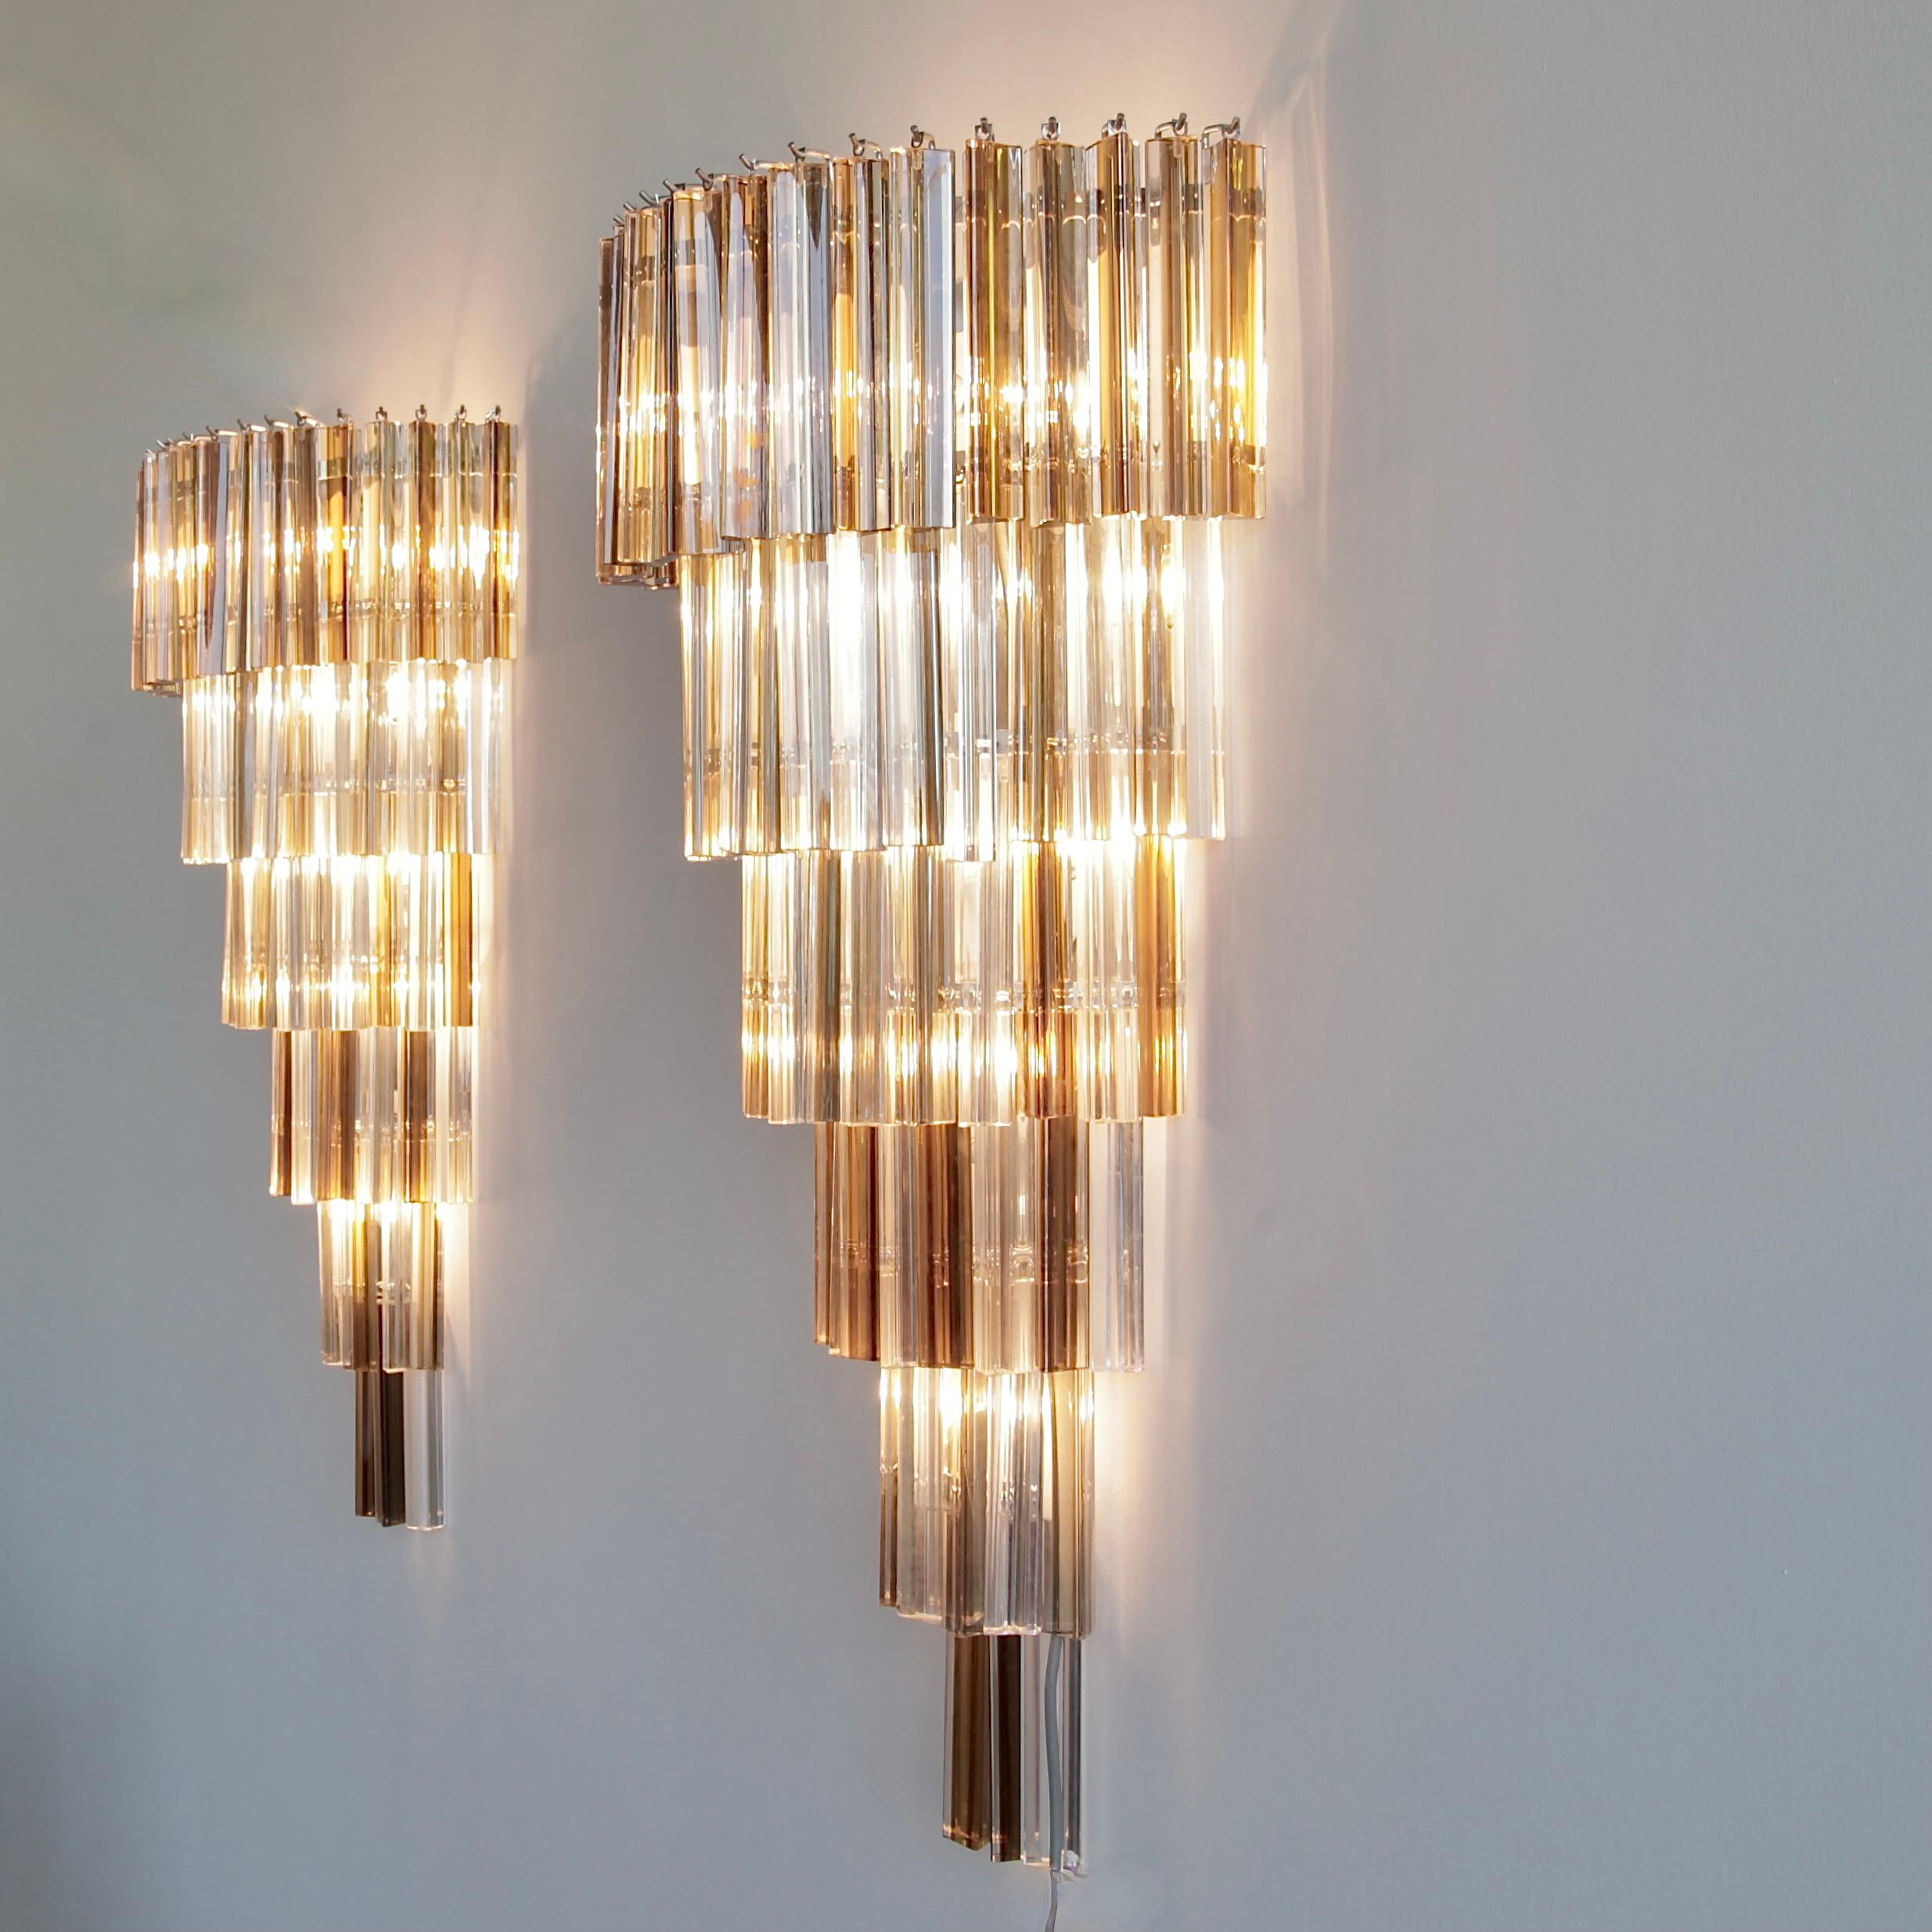 Pair of wall sconces. Italy, Murano, 1980a.

A very large pair of six-tier glass sconces with 'Trilobi' Murano glass in clear, Tabac and dark brown. Metal frames with ten E14 light fittings each.